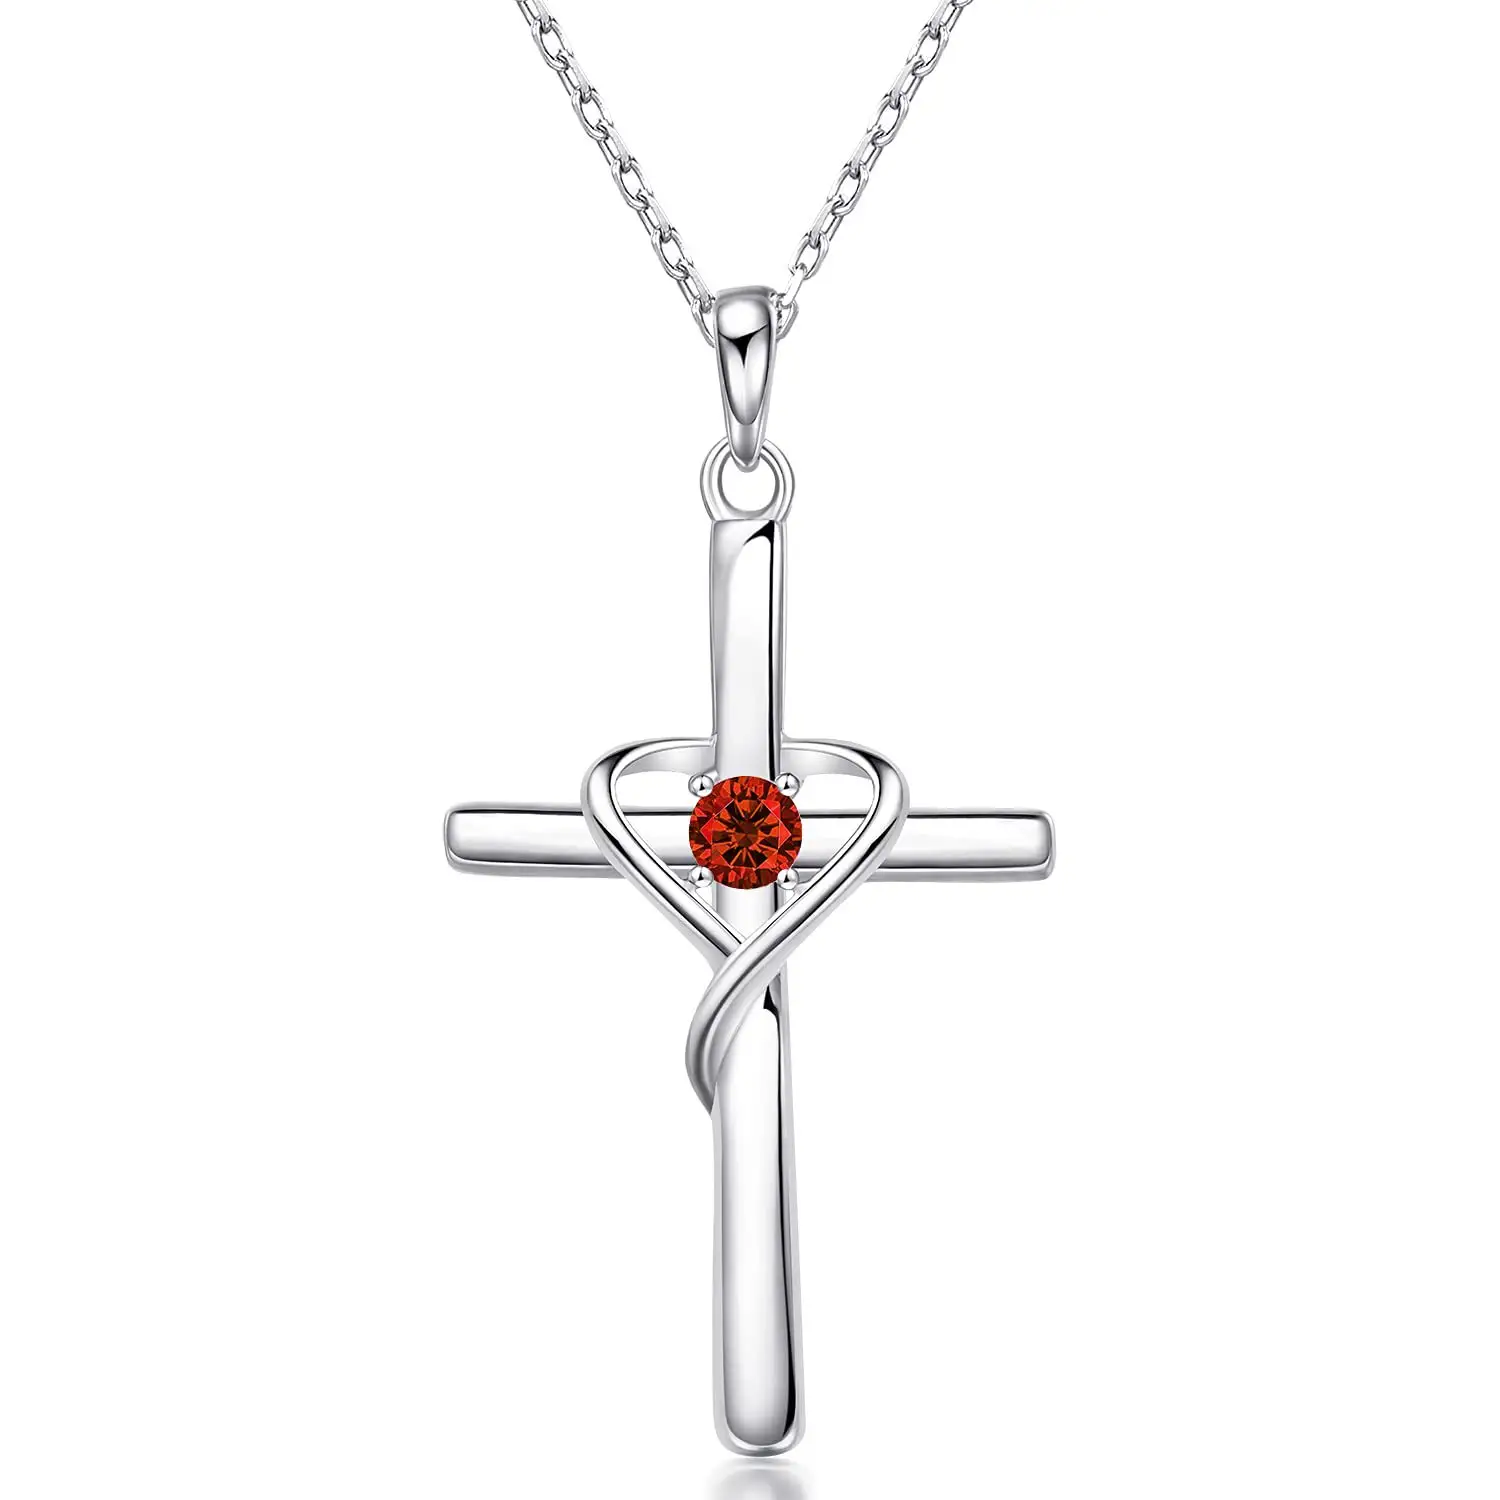 Carline OEM High Quality 925 Sterling Silver 18K Gold Plated Cross 5A CZ Birthstone Necklaces Jewelry Gifts for Women Men